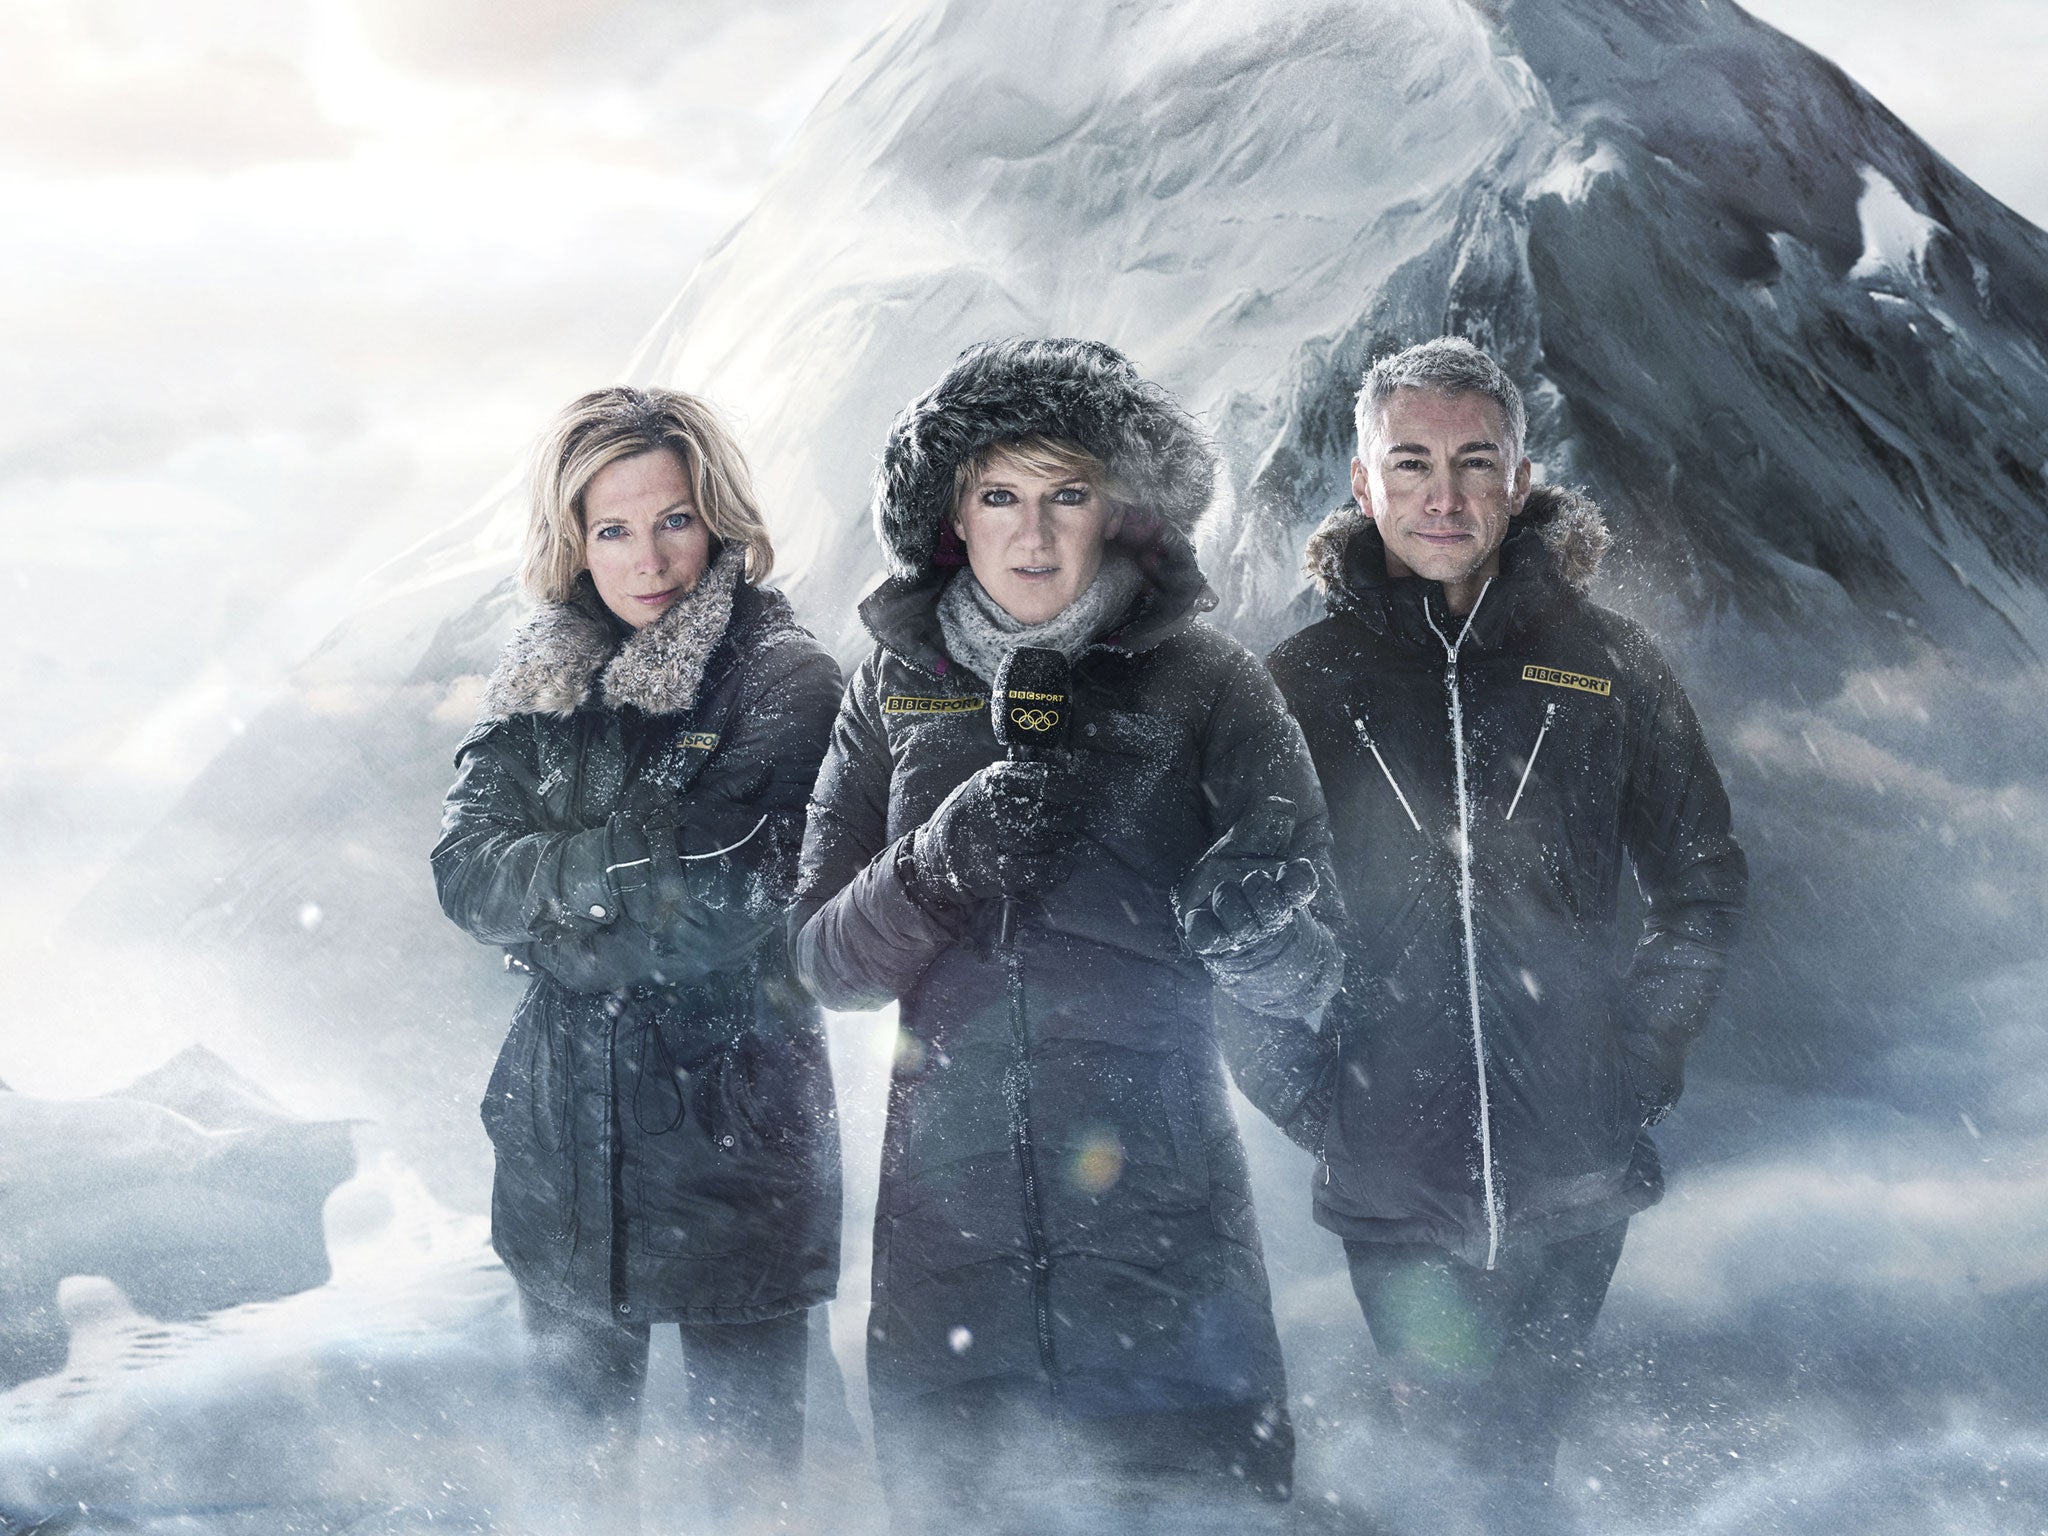 Hazel Irvine, Clare Balding and Jonathan Edwards will lead the BBC's Winter Olympics coverage